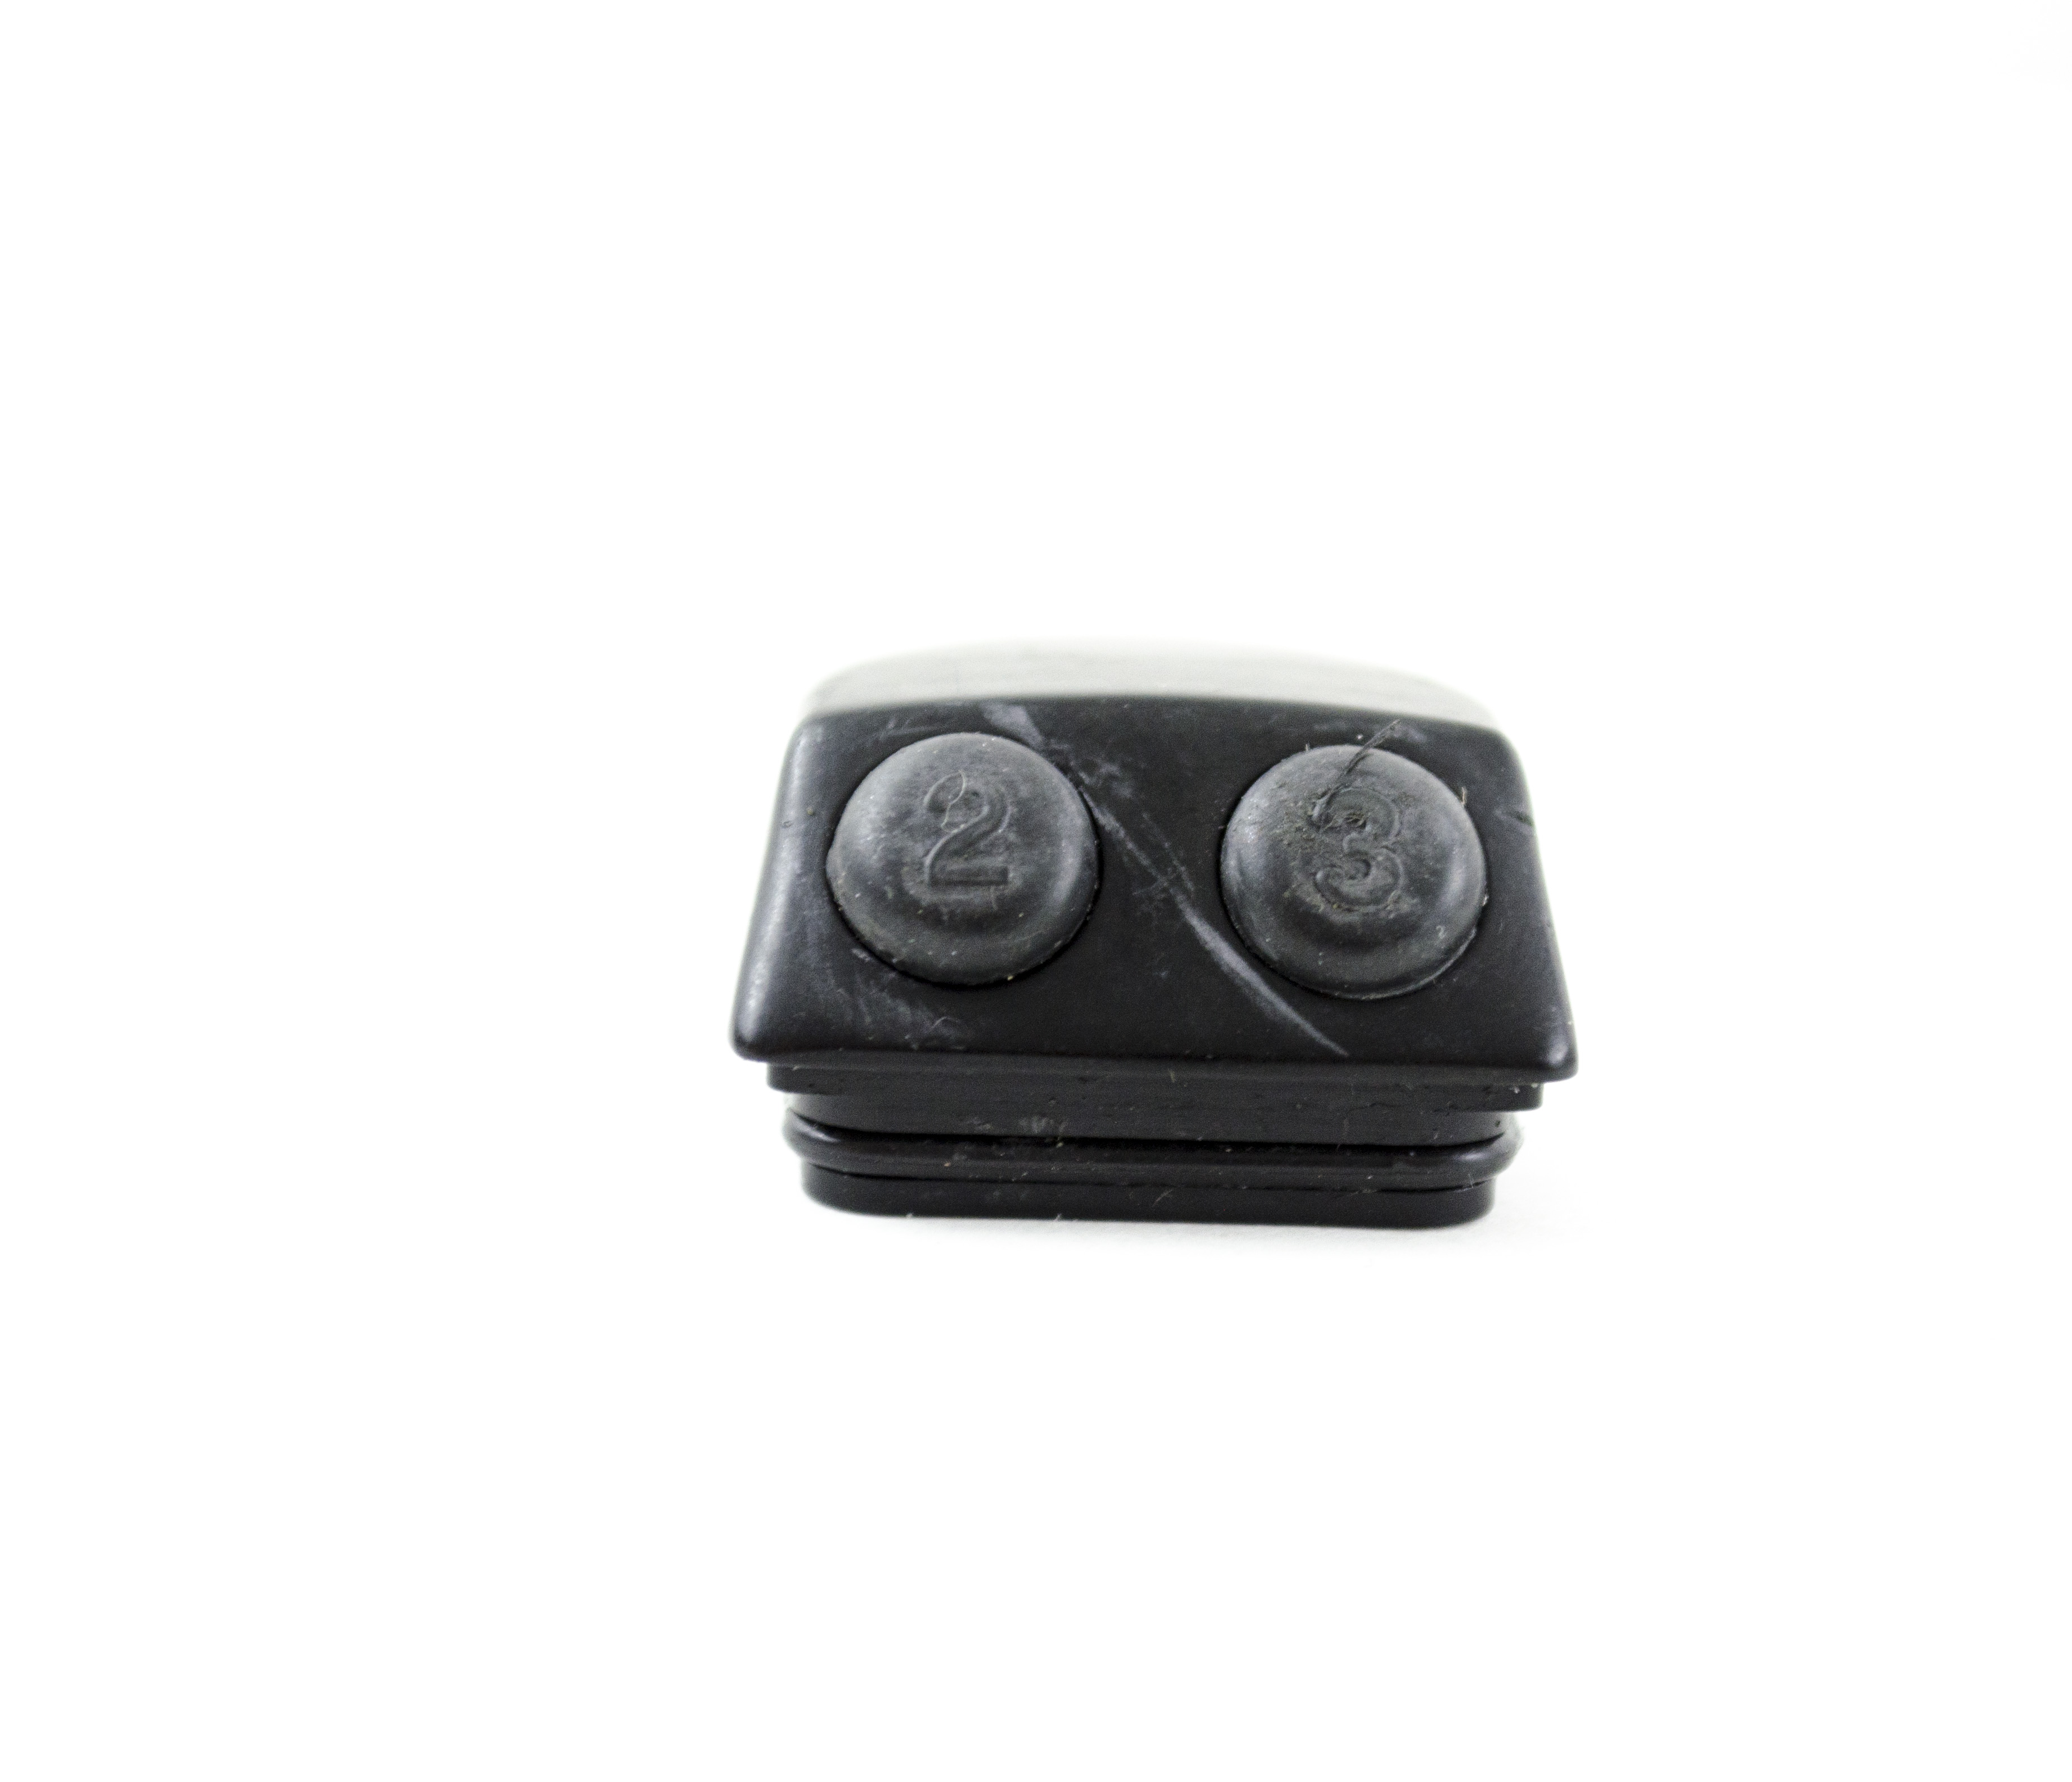 OEM Headswitch Cover - ENF-VT2, CYF-VA2